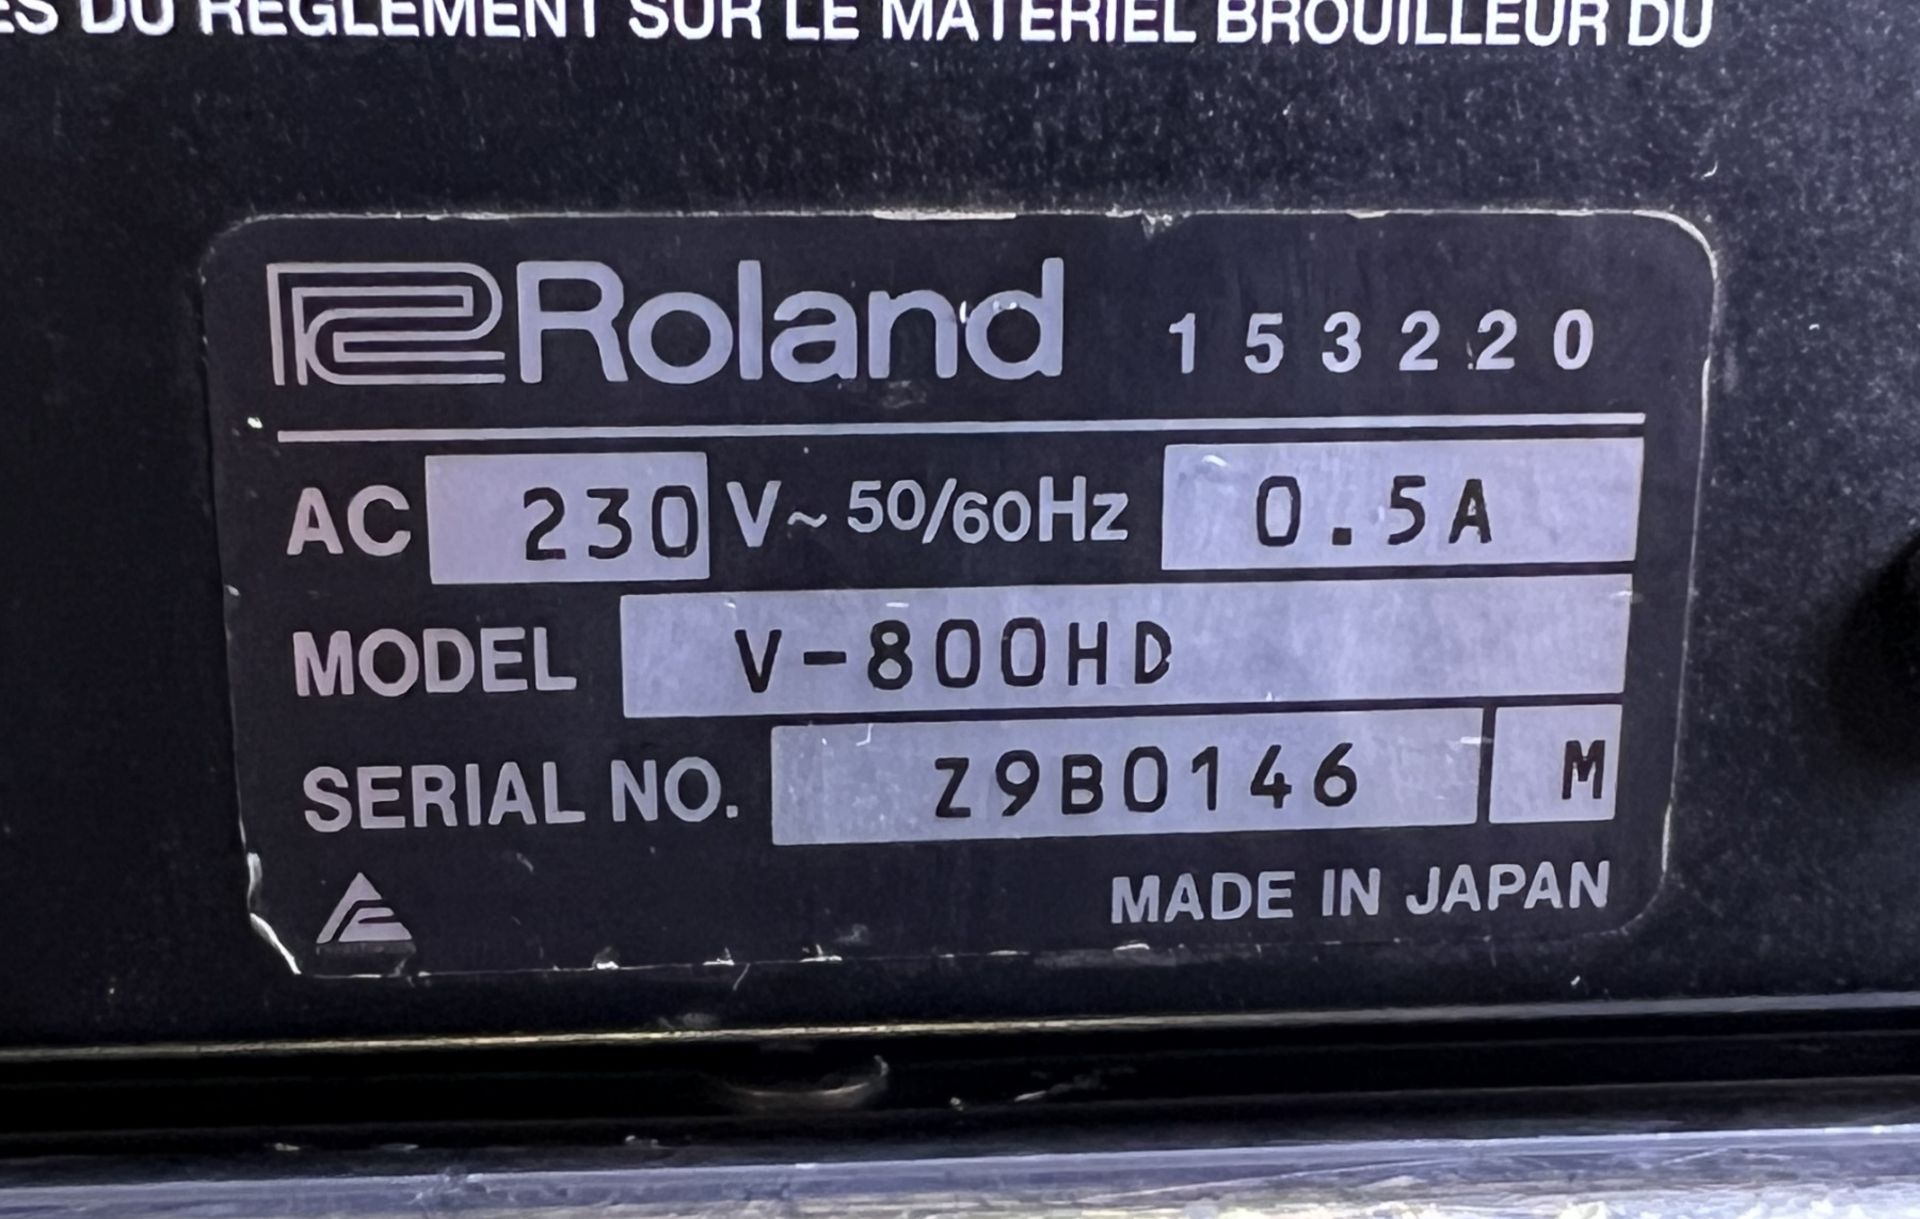 Roland V800HD vision mixer in flight case - case dimensions: L 690 x W 370 x H 230mm - FAULTY OUTPUT - Image 7 of 10